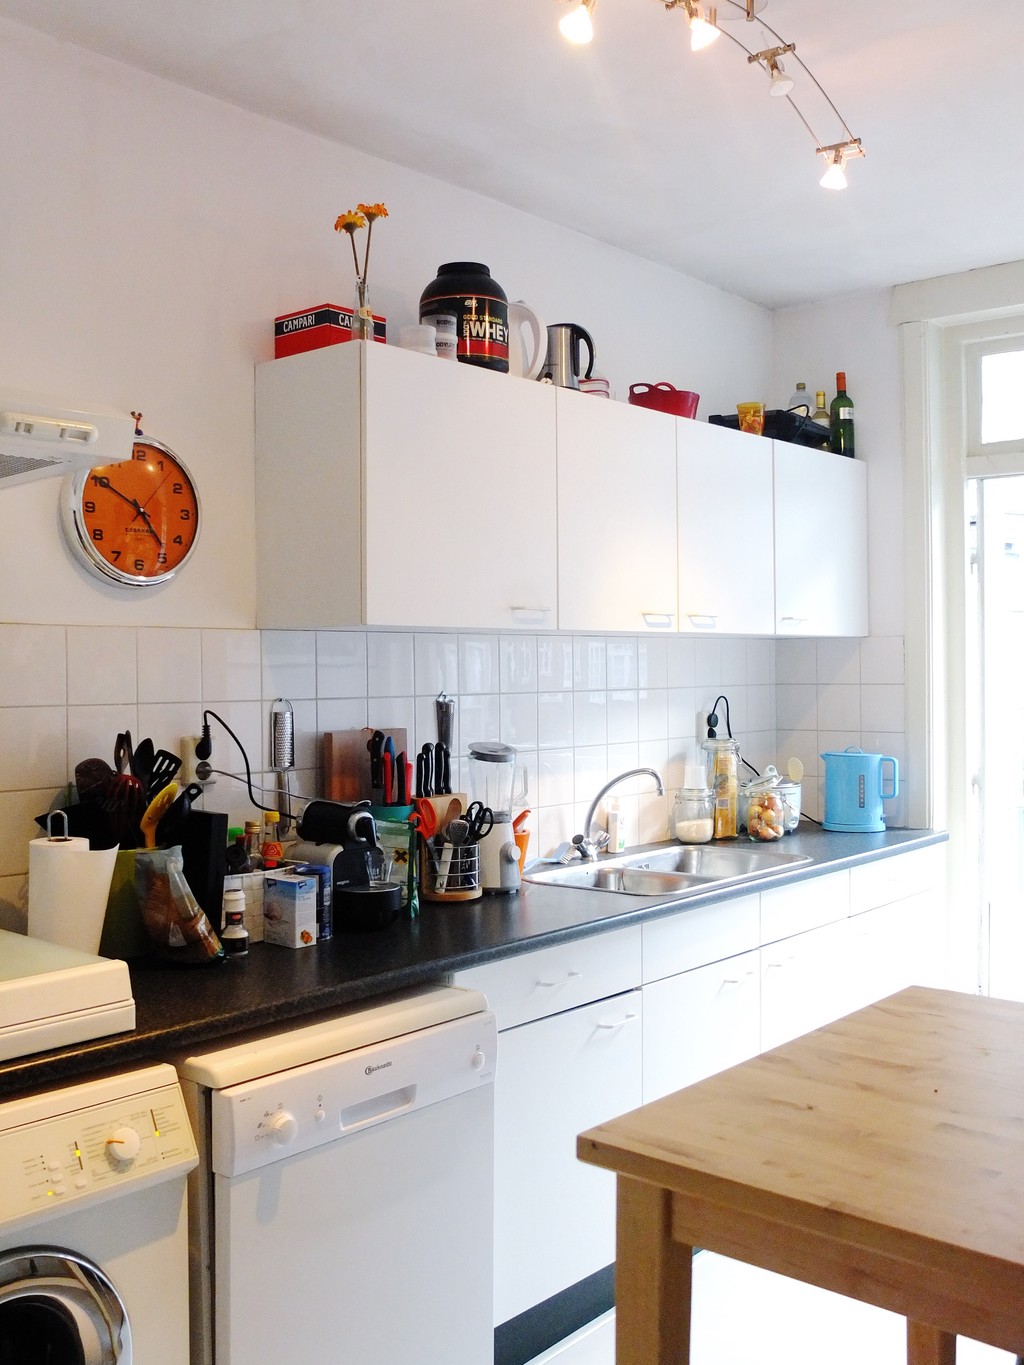 Amsterdam Apartments For Rent Monthly